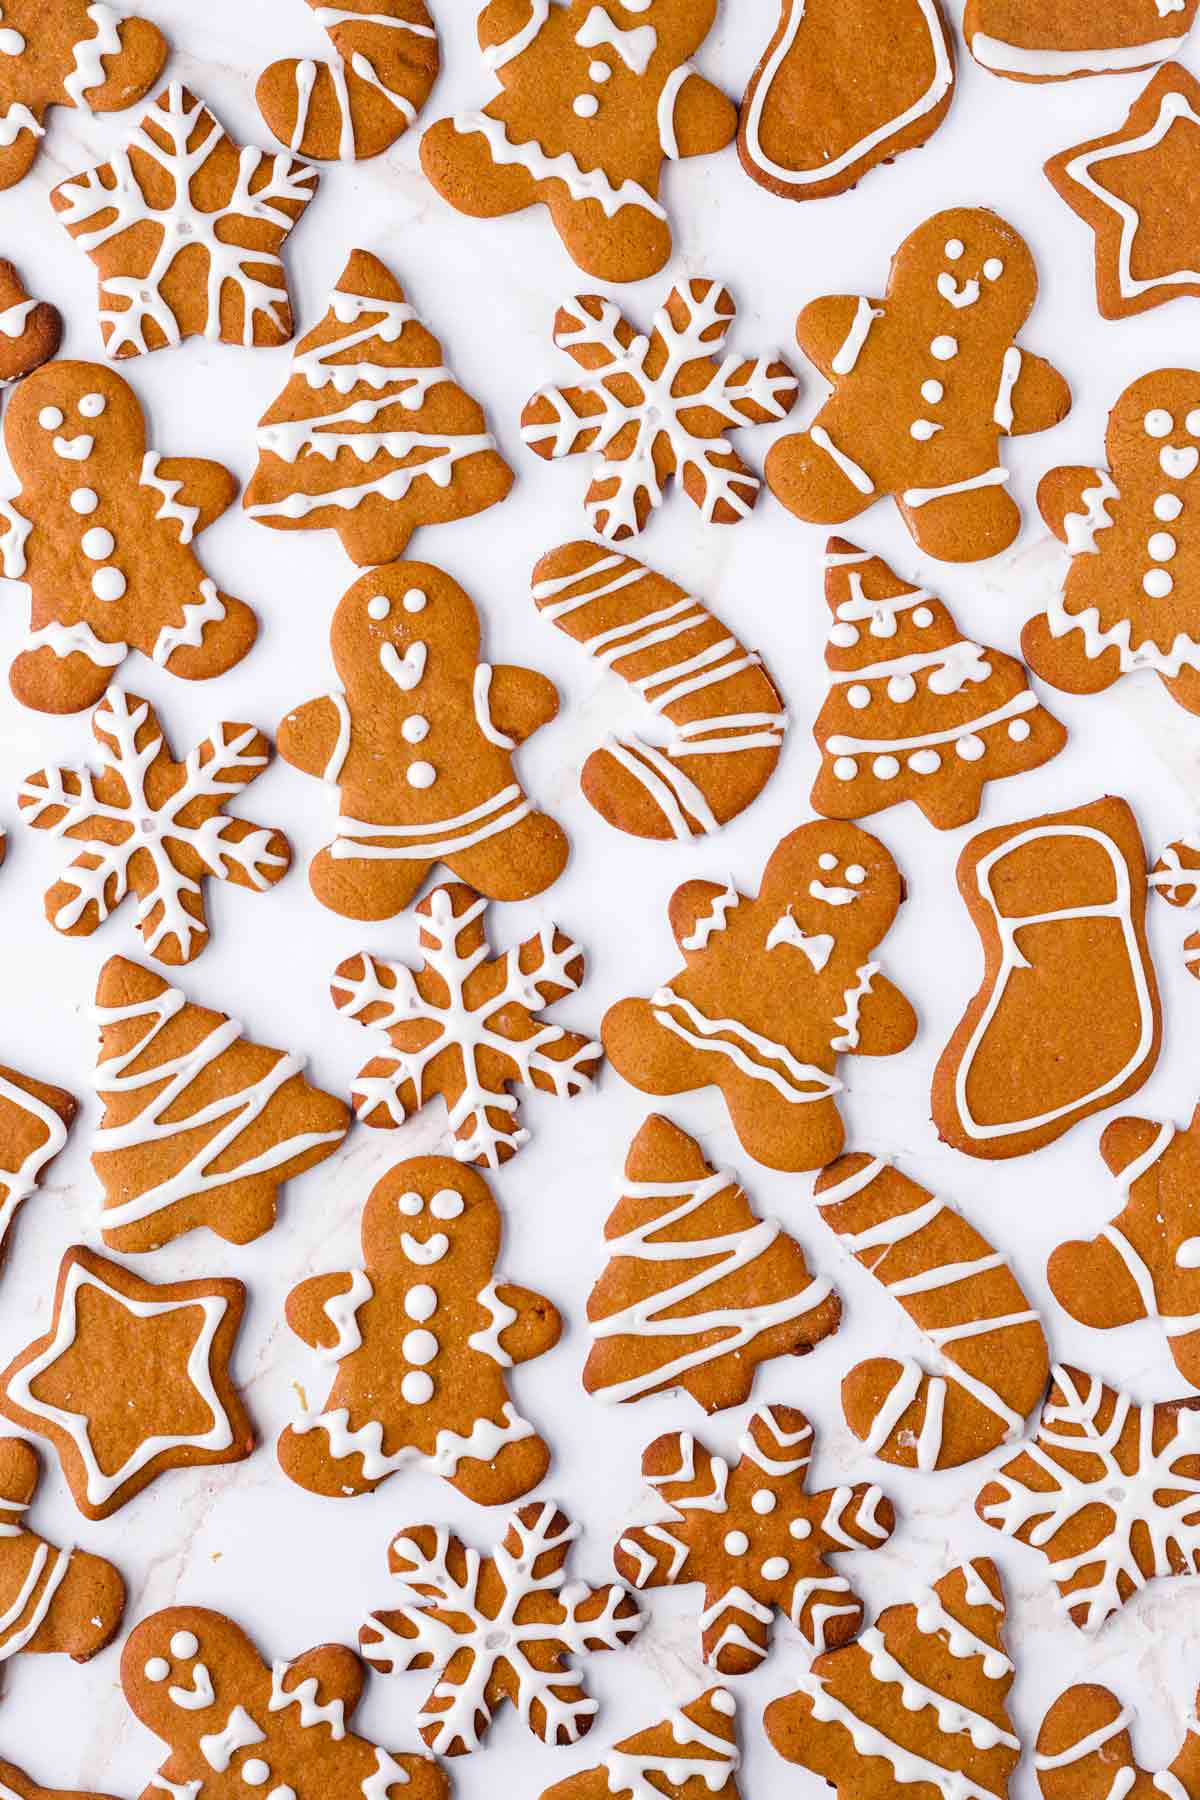 decorated gingerbread cookies of many holiday shapes